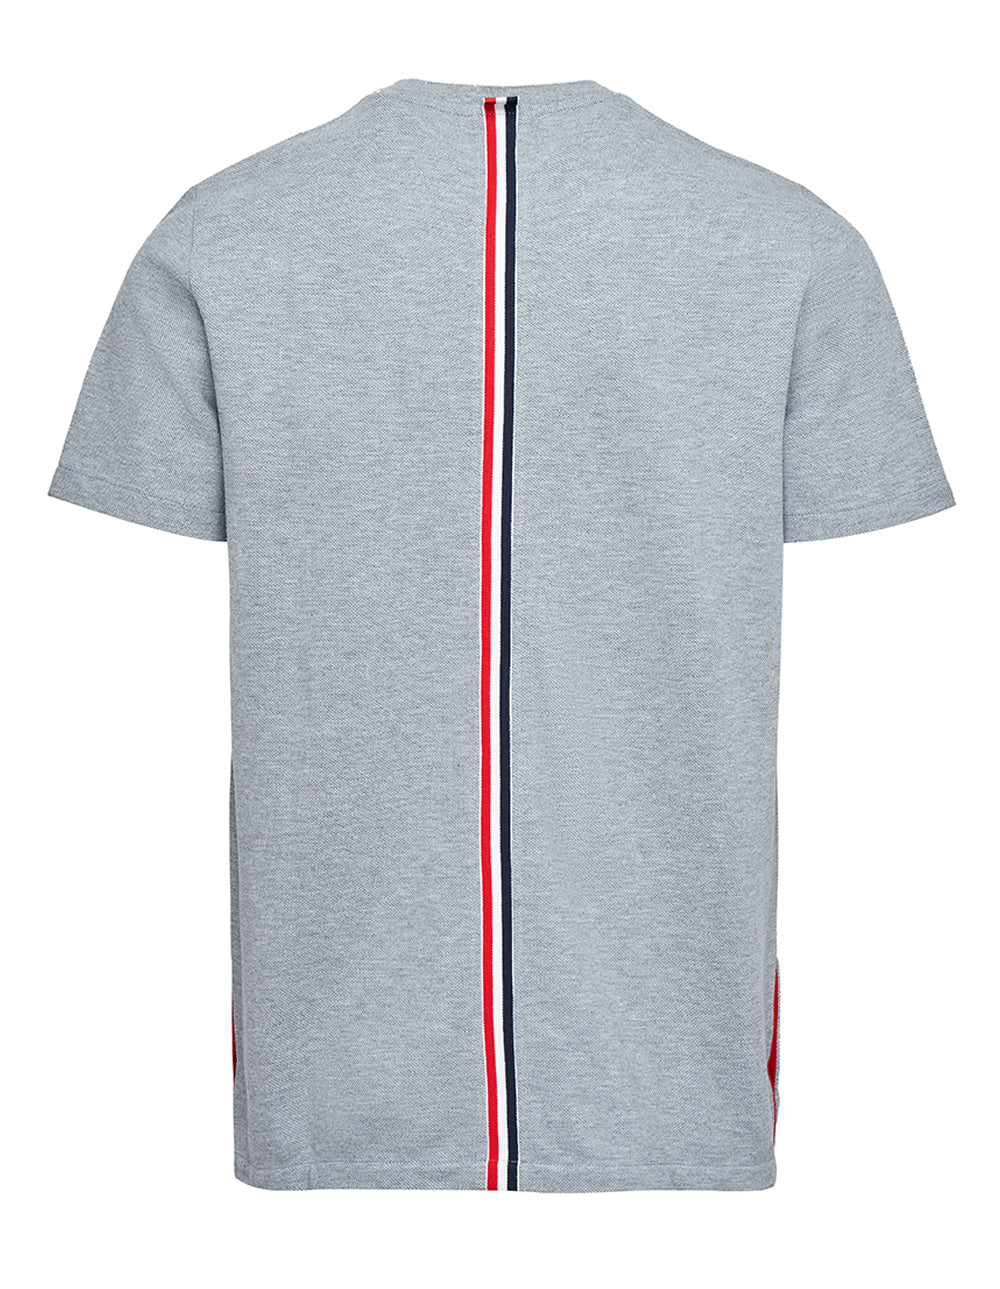 Thom Browne Relaxed Fit Tee Light Grey 2